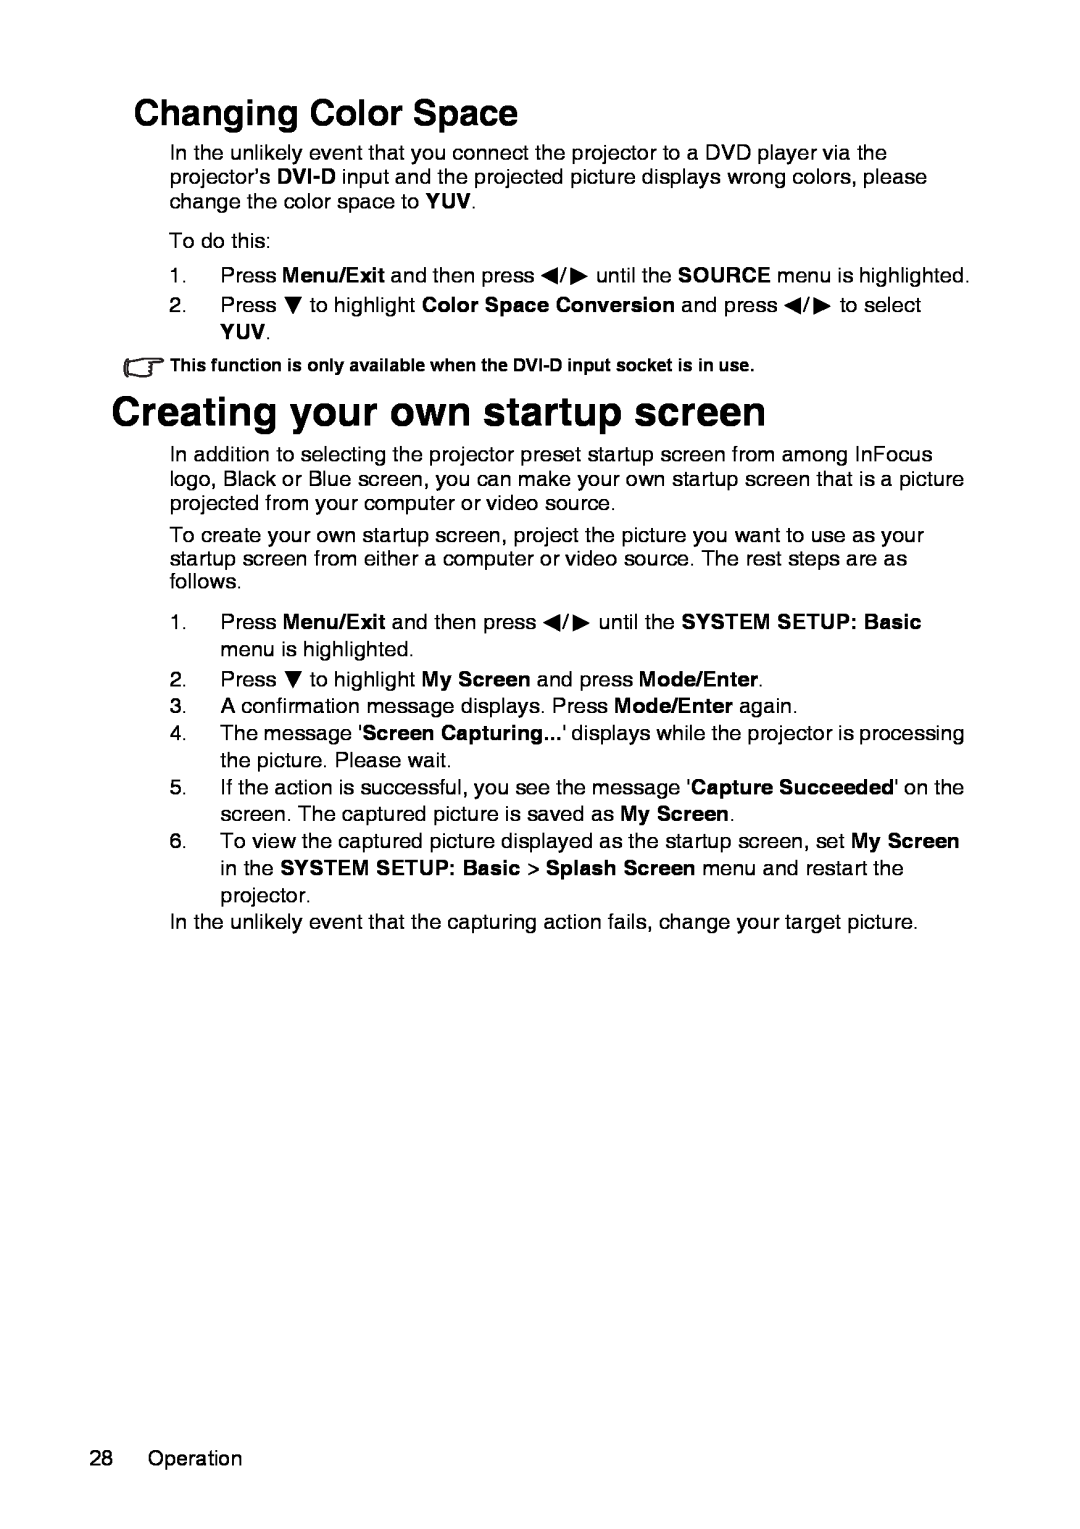 InFocus XS1 manual Creating your own startup screen, Changing Color Space 